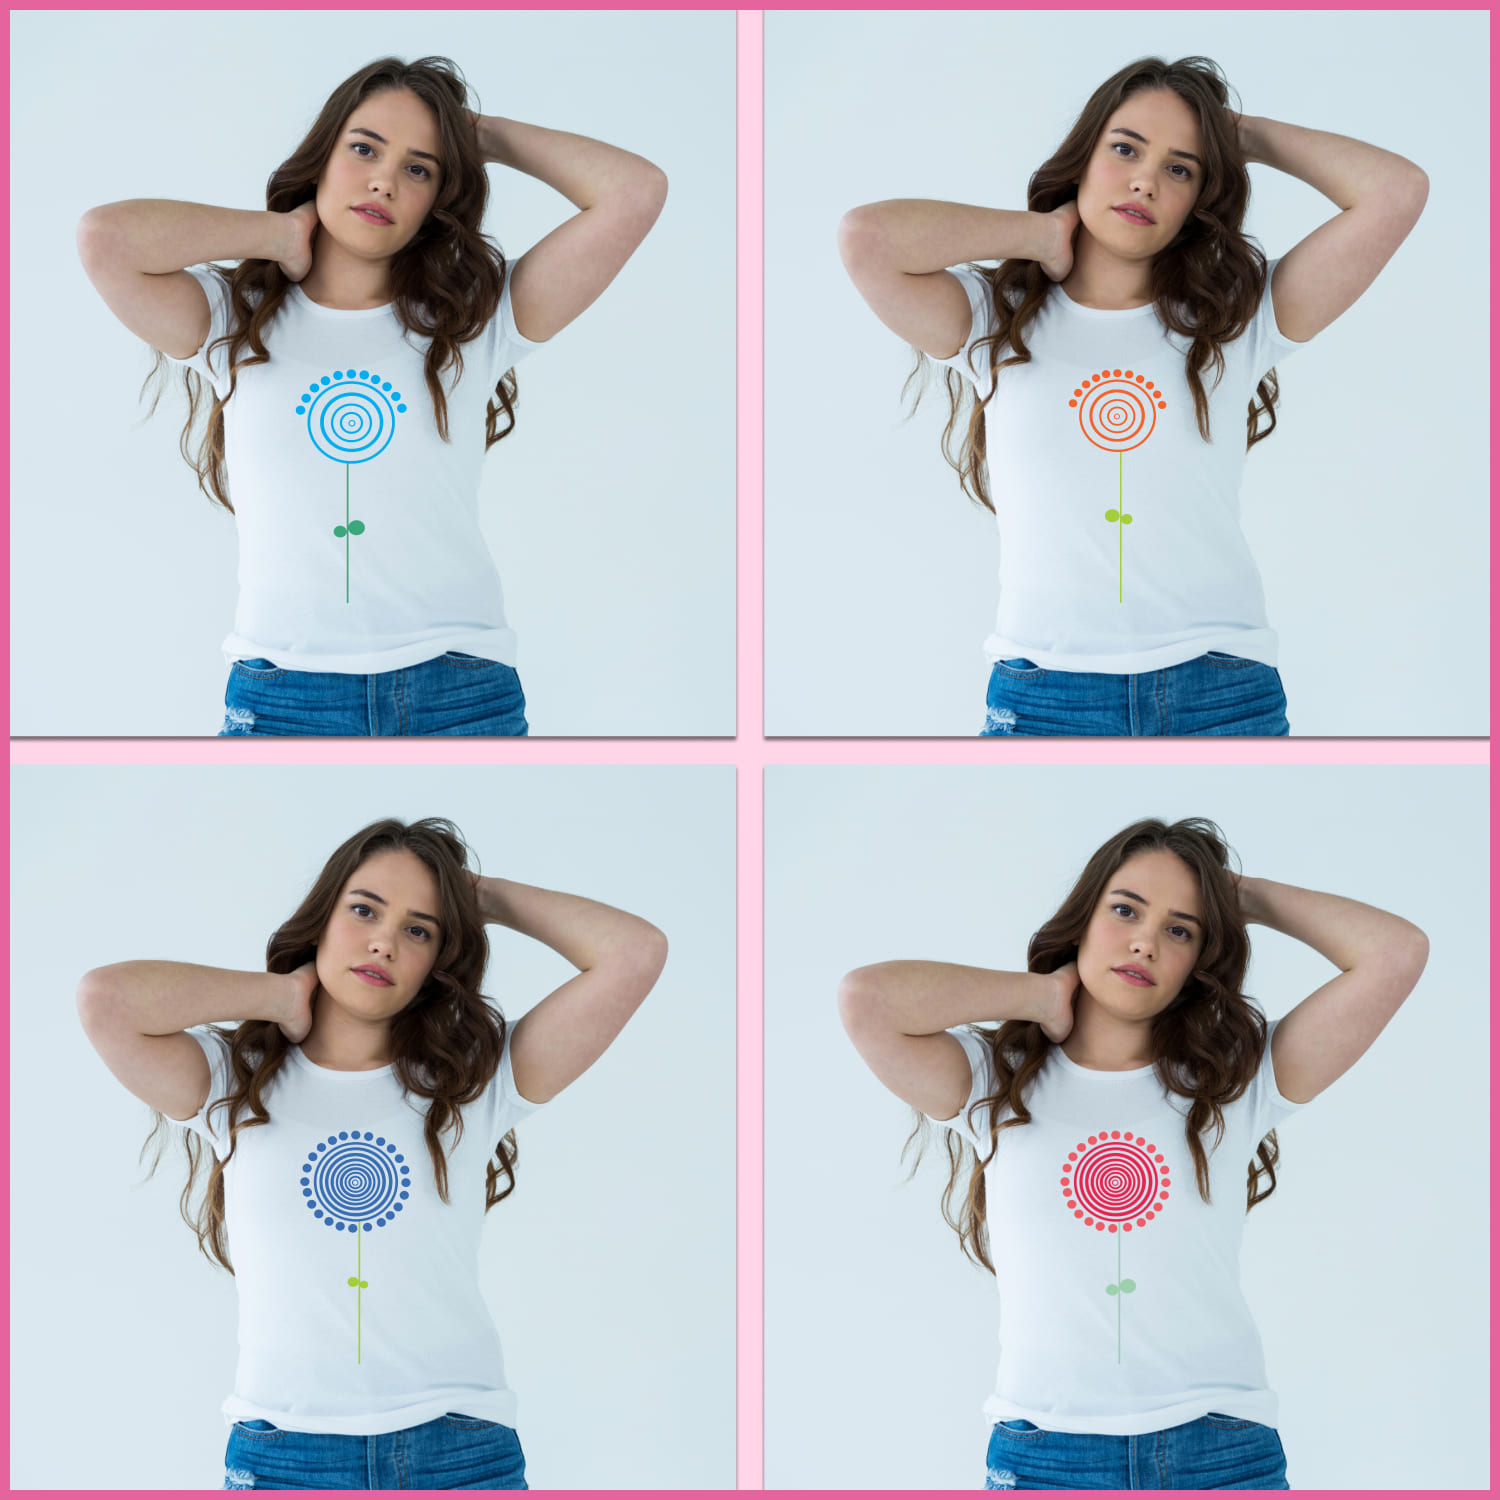 Collection from images of t-shirts with gorgeous dandelion prints.